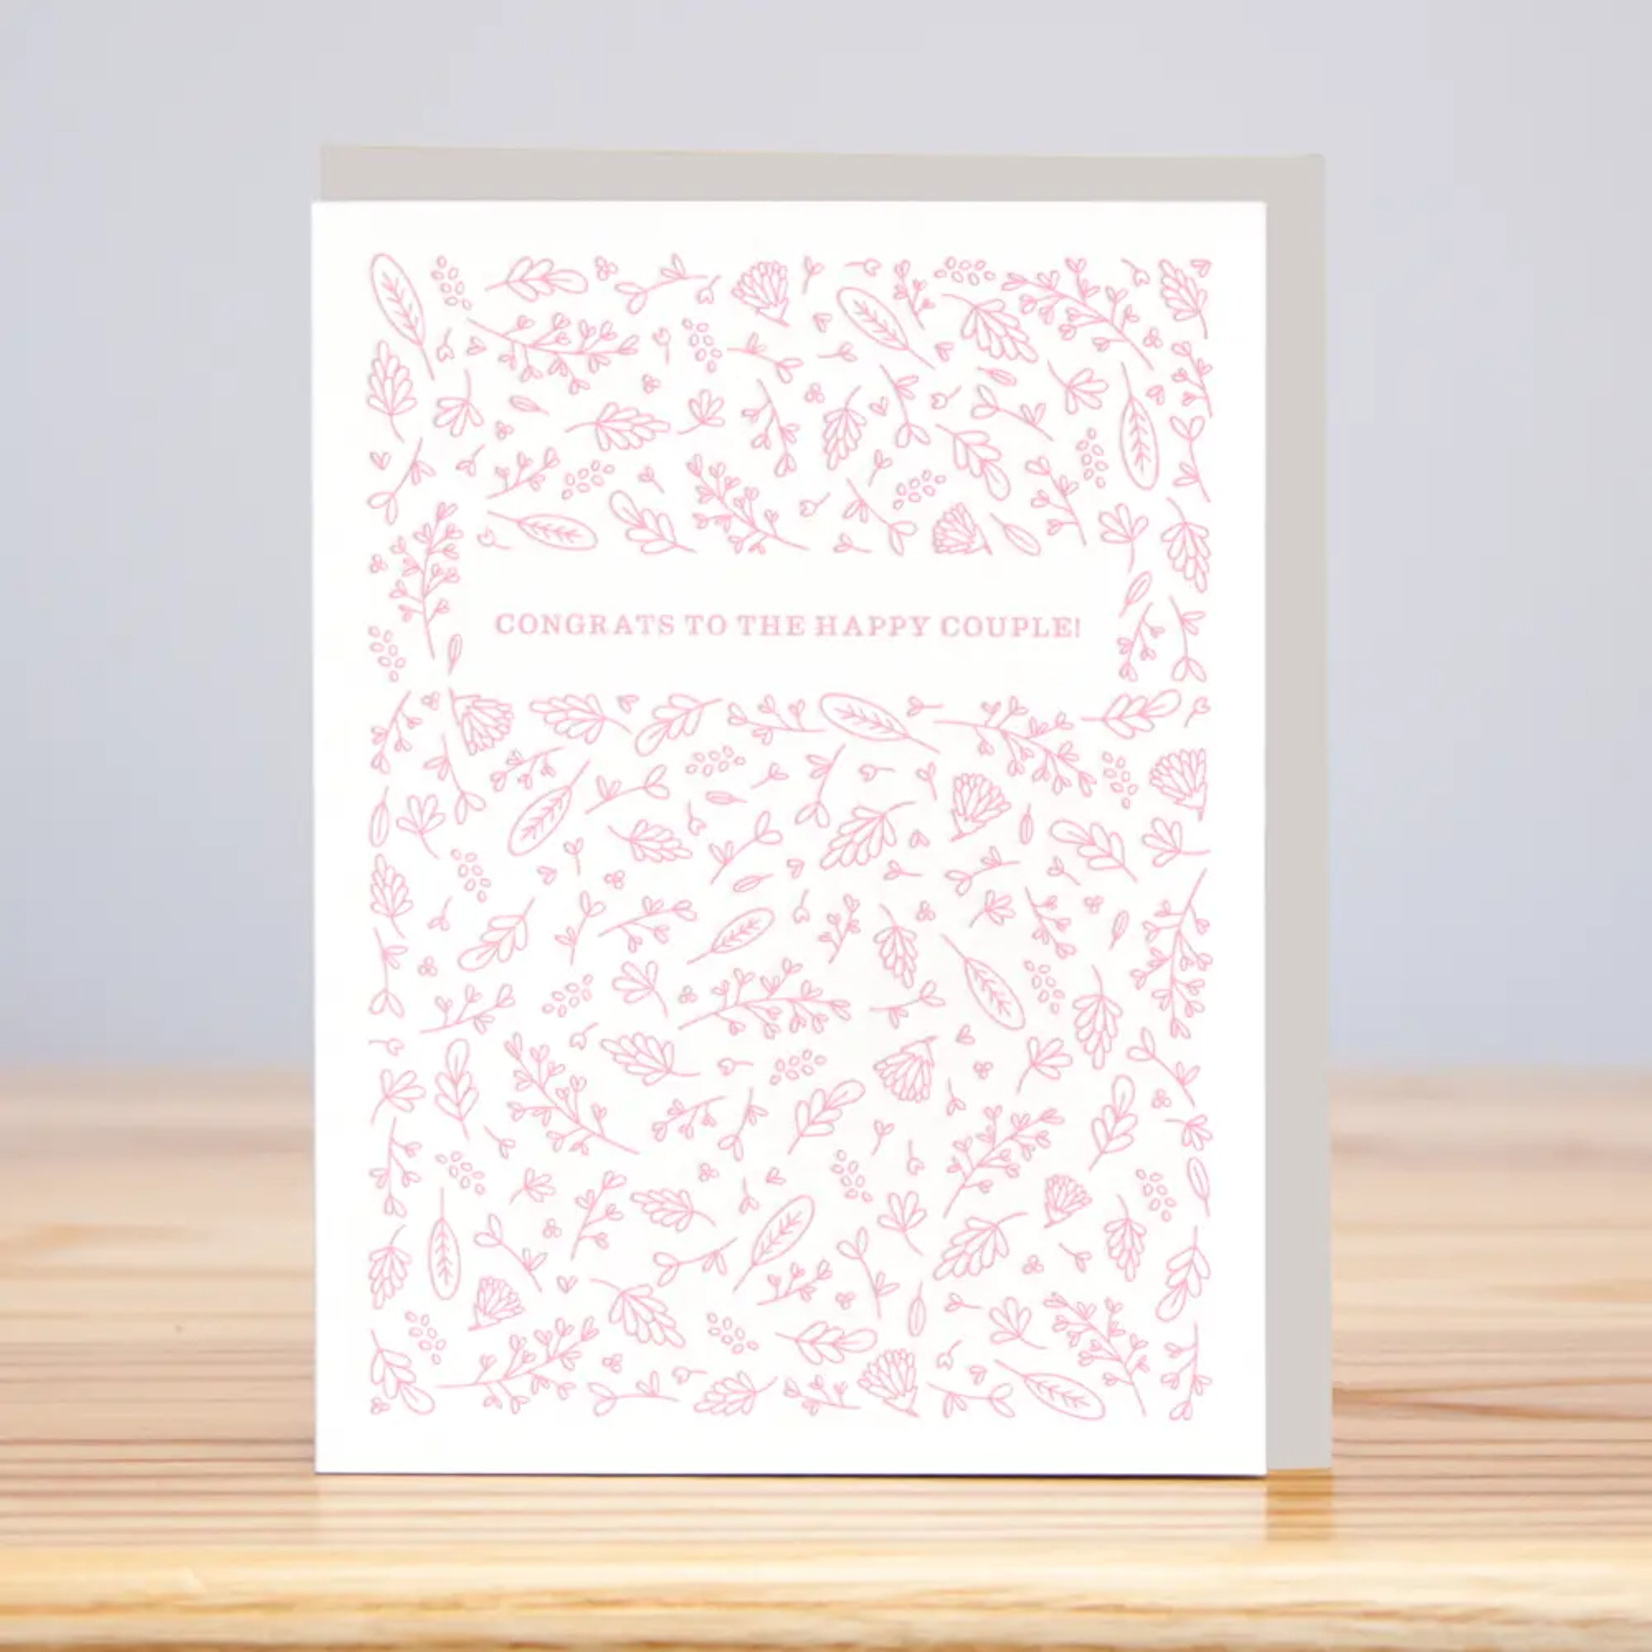 Huckleberry Letterpress Congrats to the Happy Couple Greeting Card